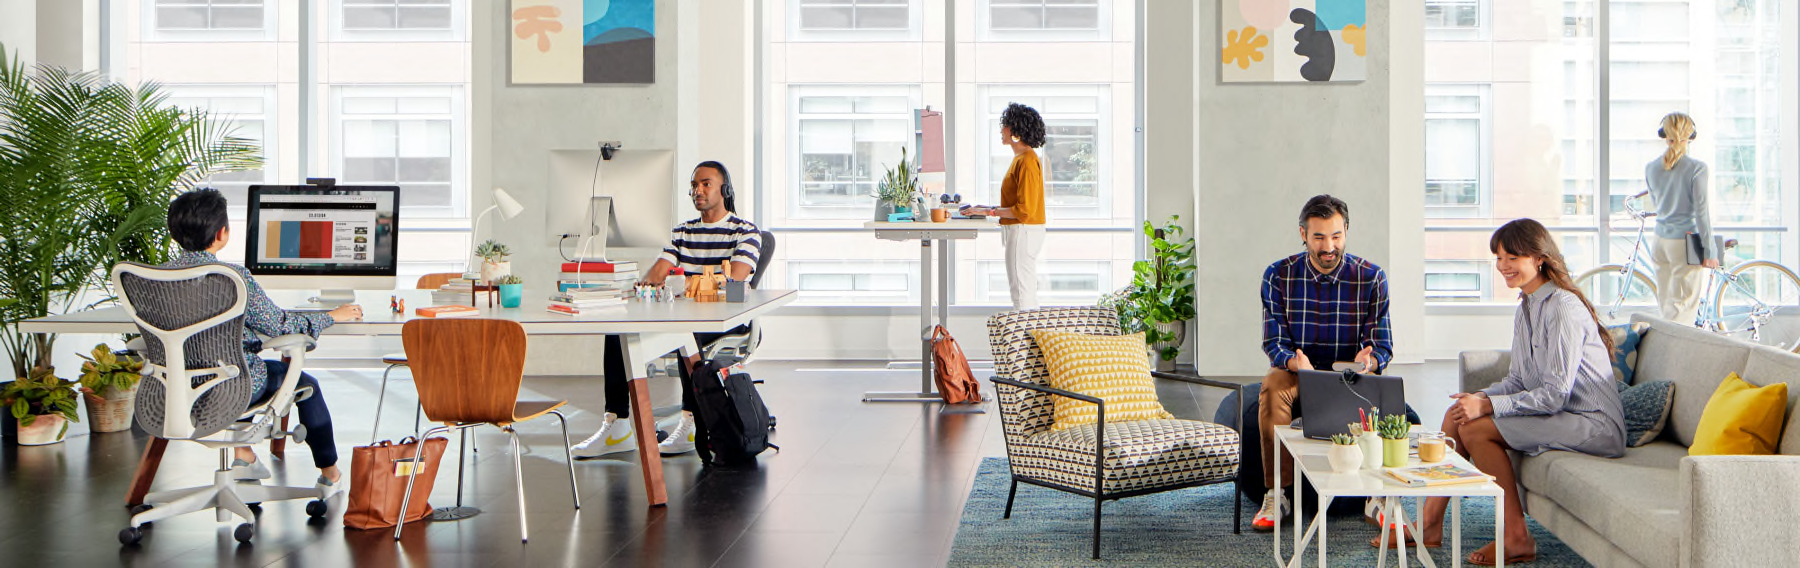 Logitech Workspace Solutions for Office, Home and Remote